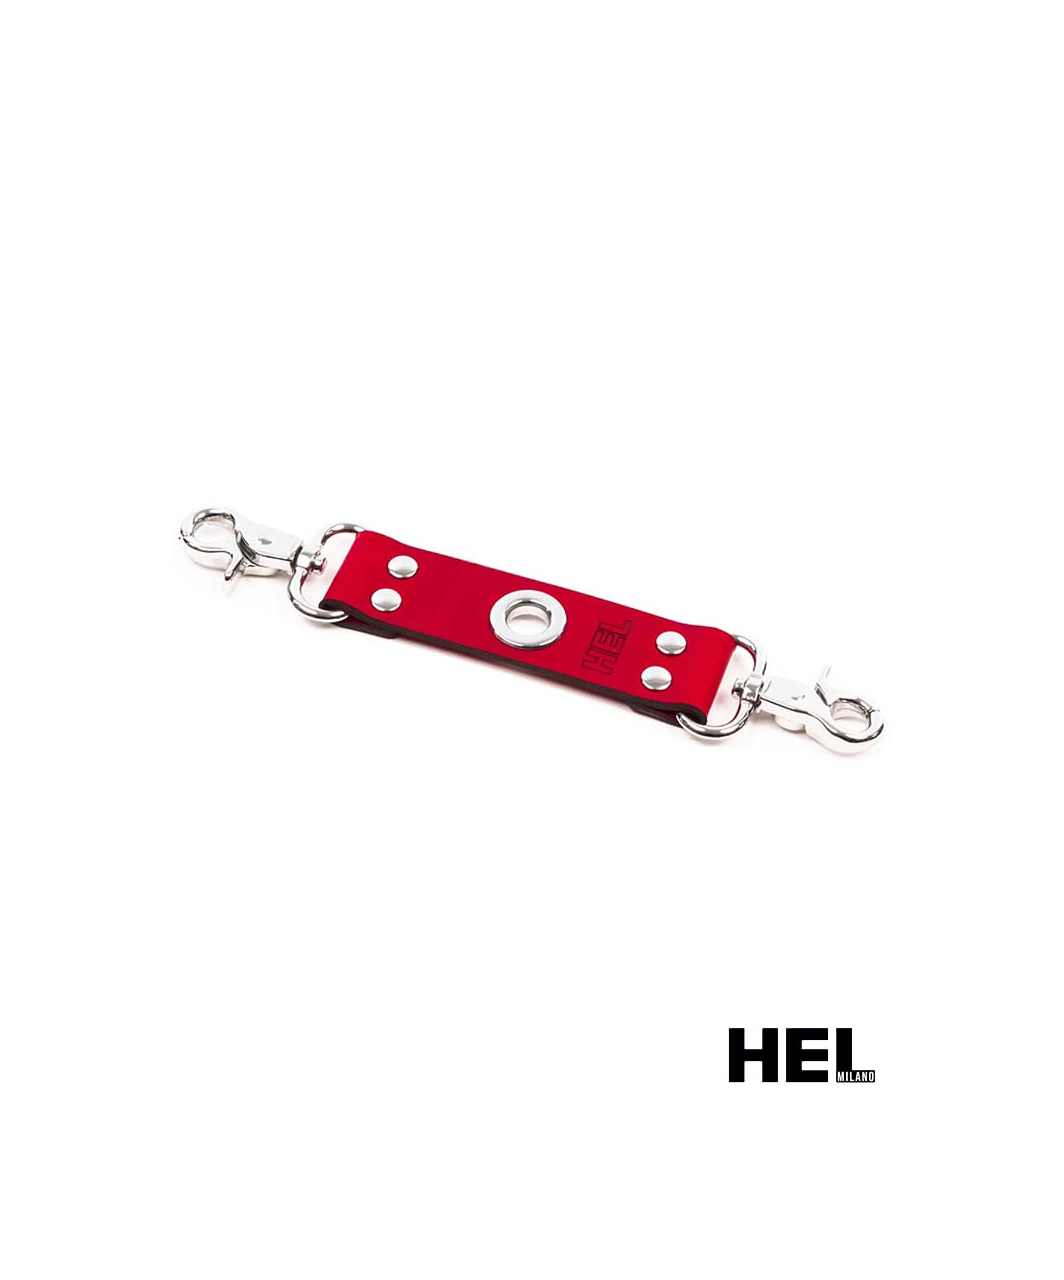 HEL Milano 17 cm long Leather Connector with Snap Hooks